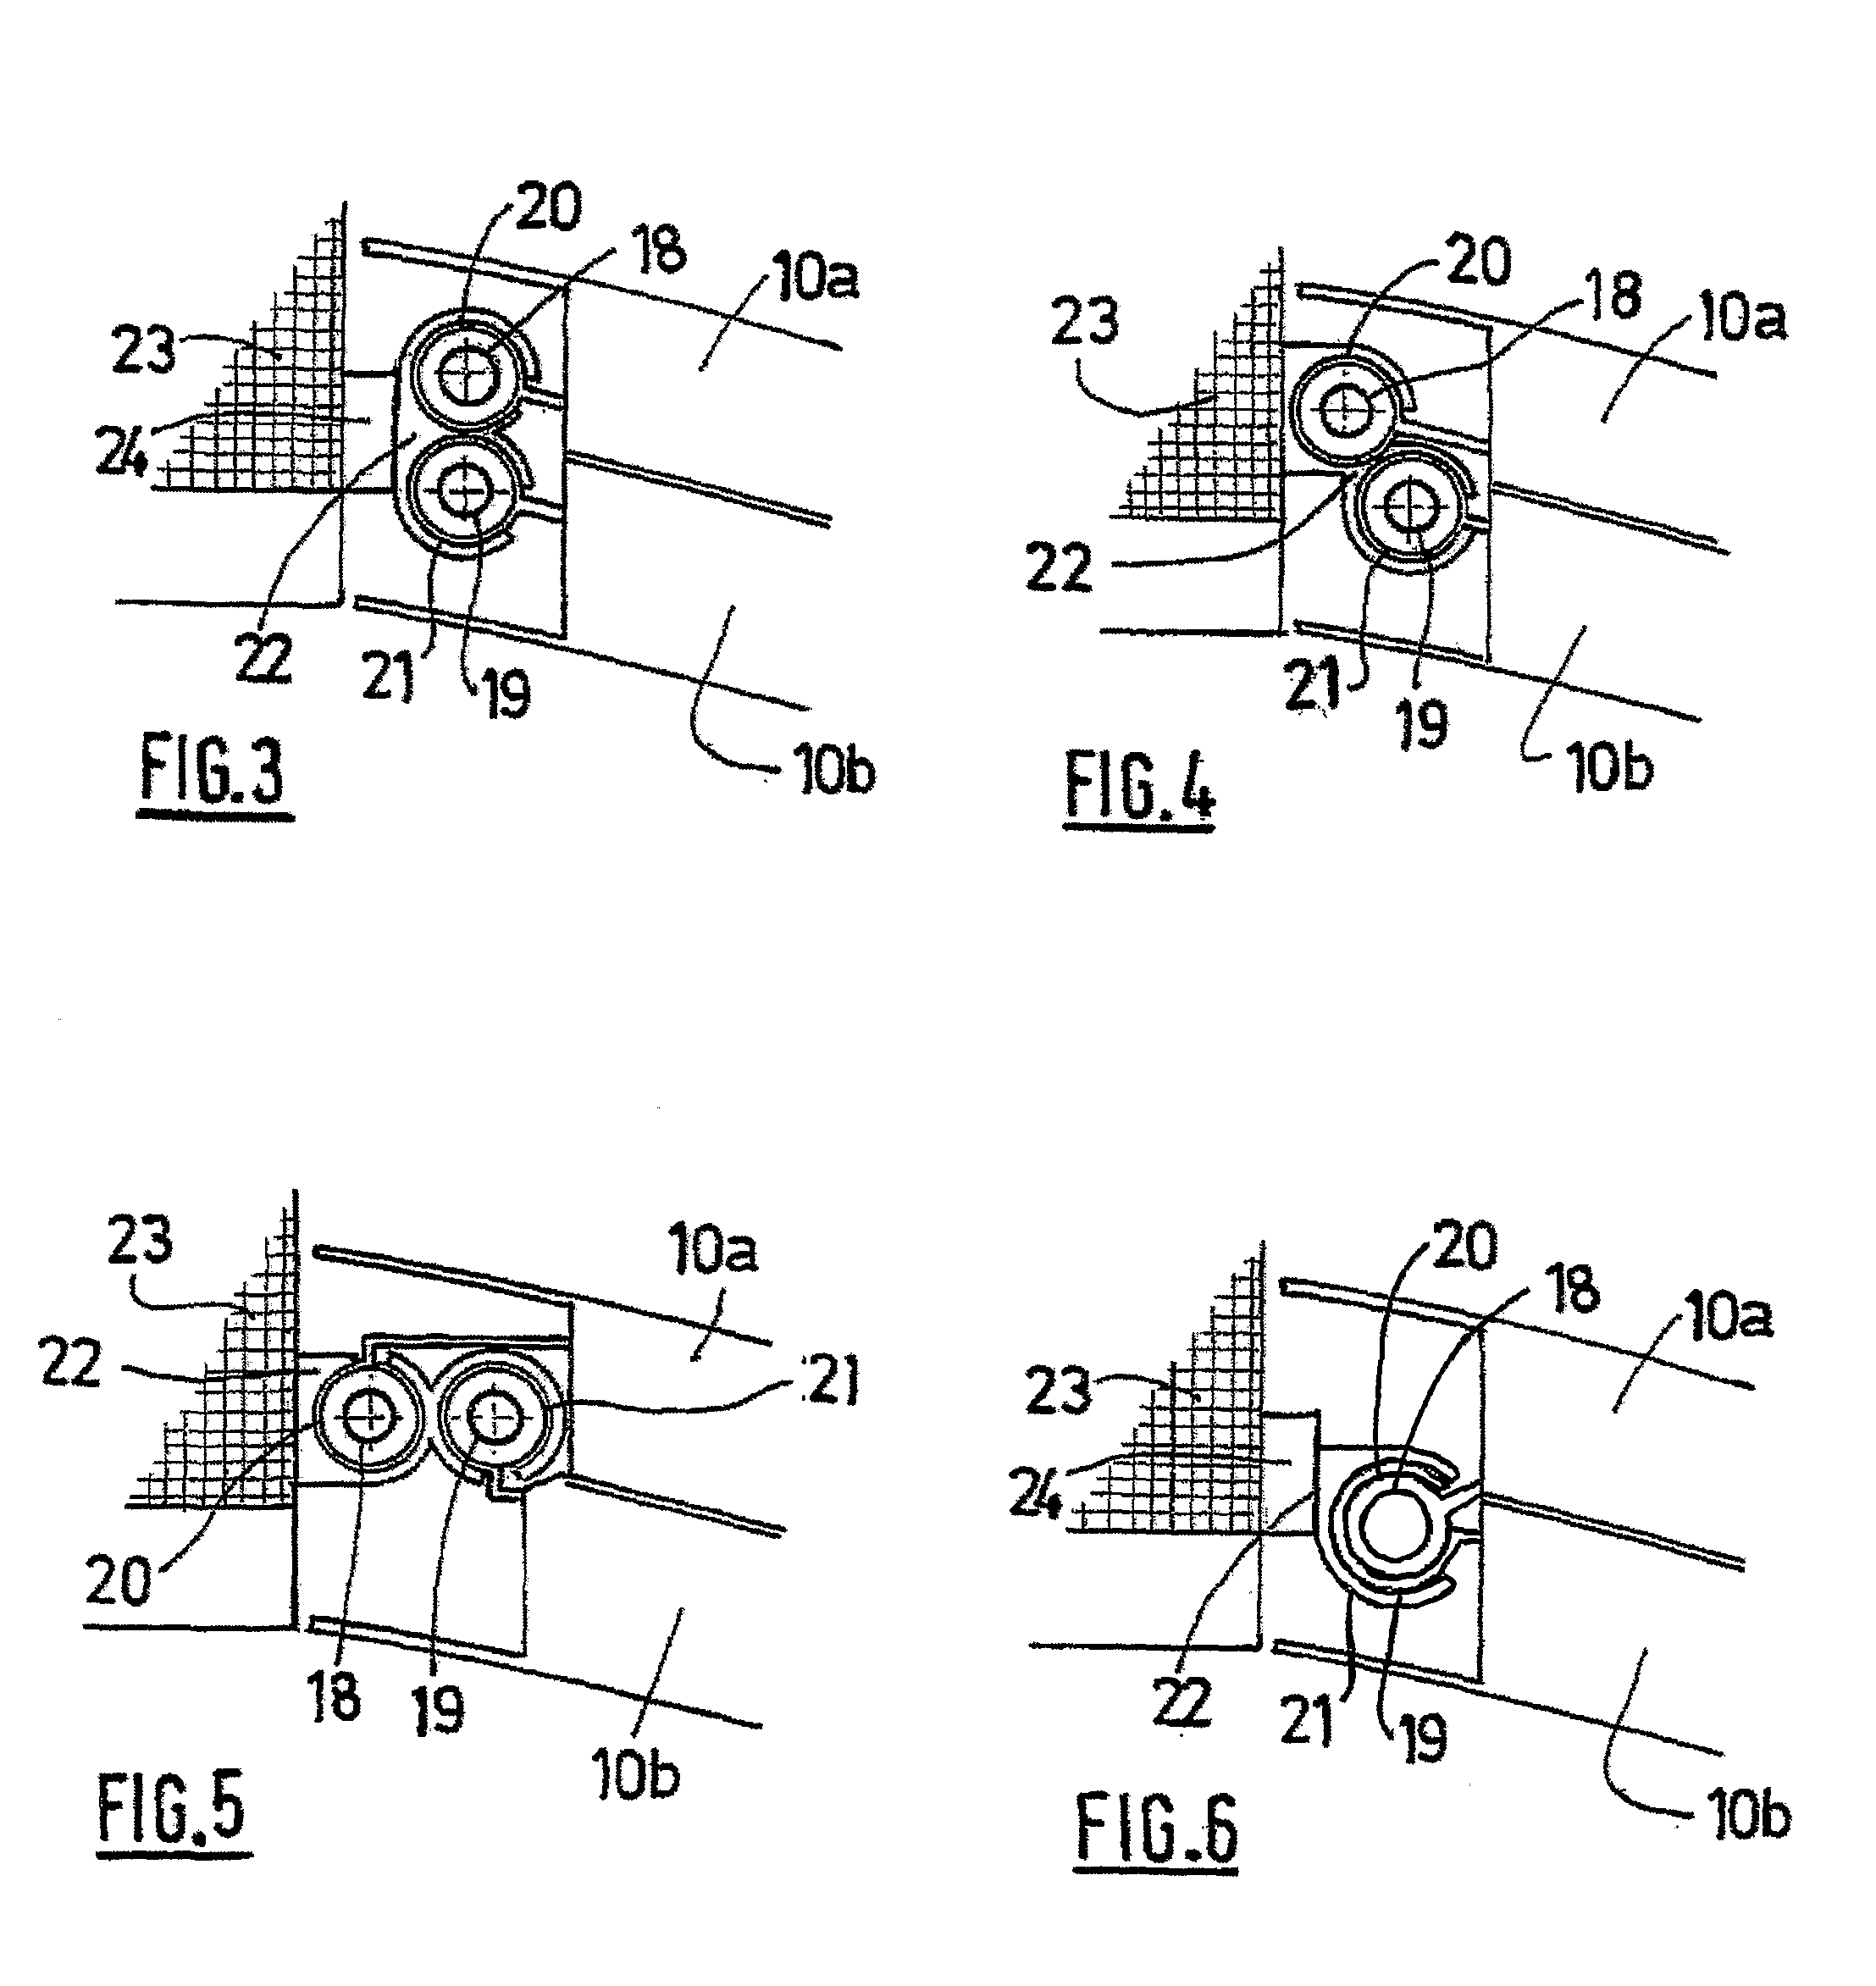 Thrust reverser forming an adaptive nozzle